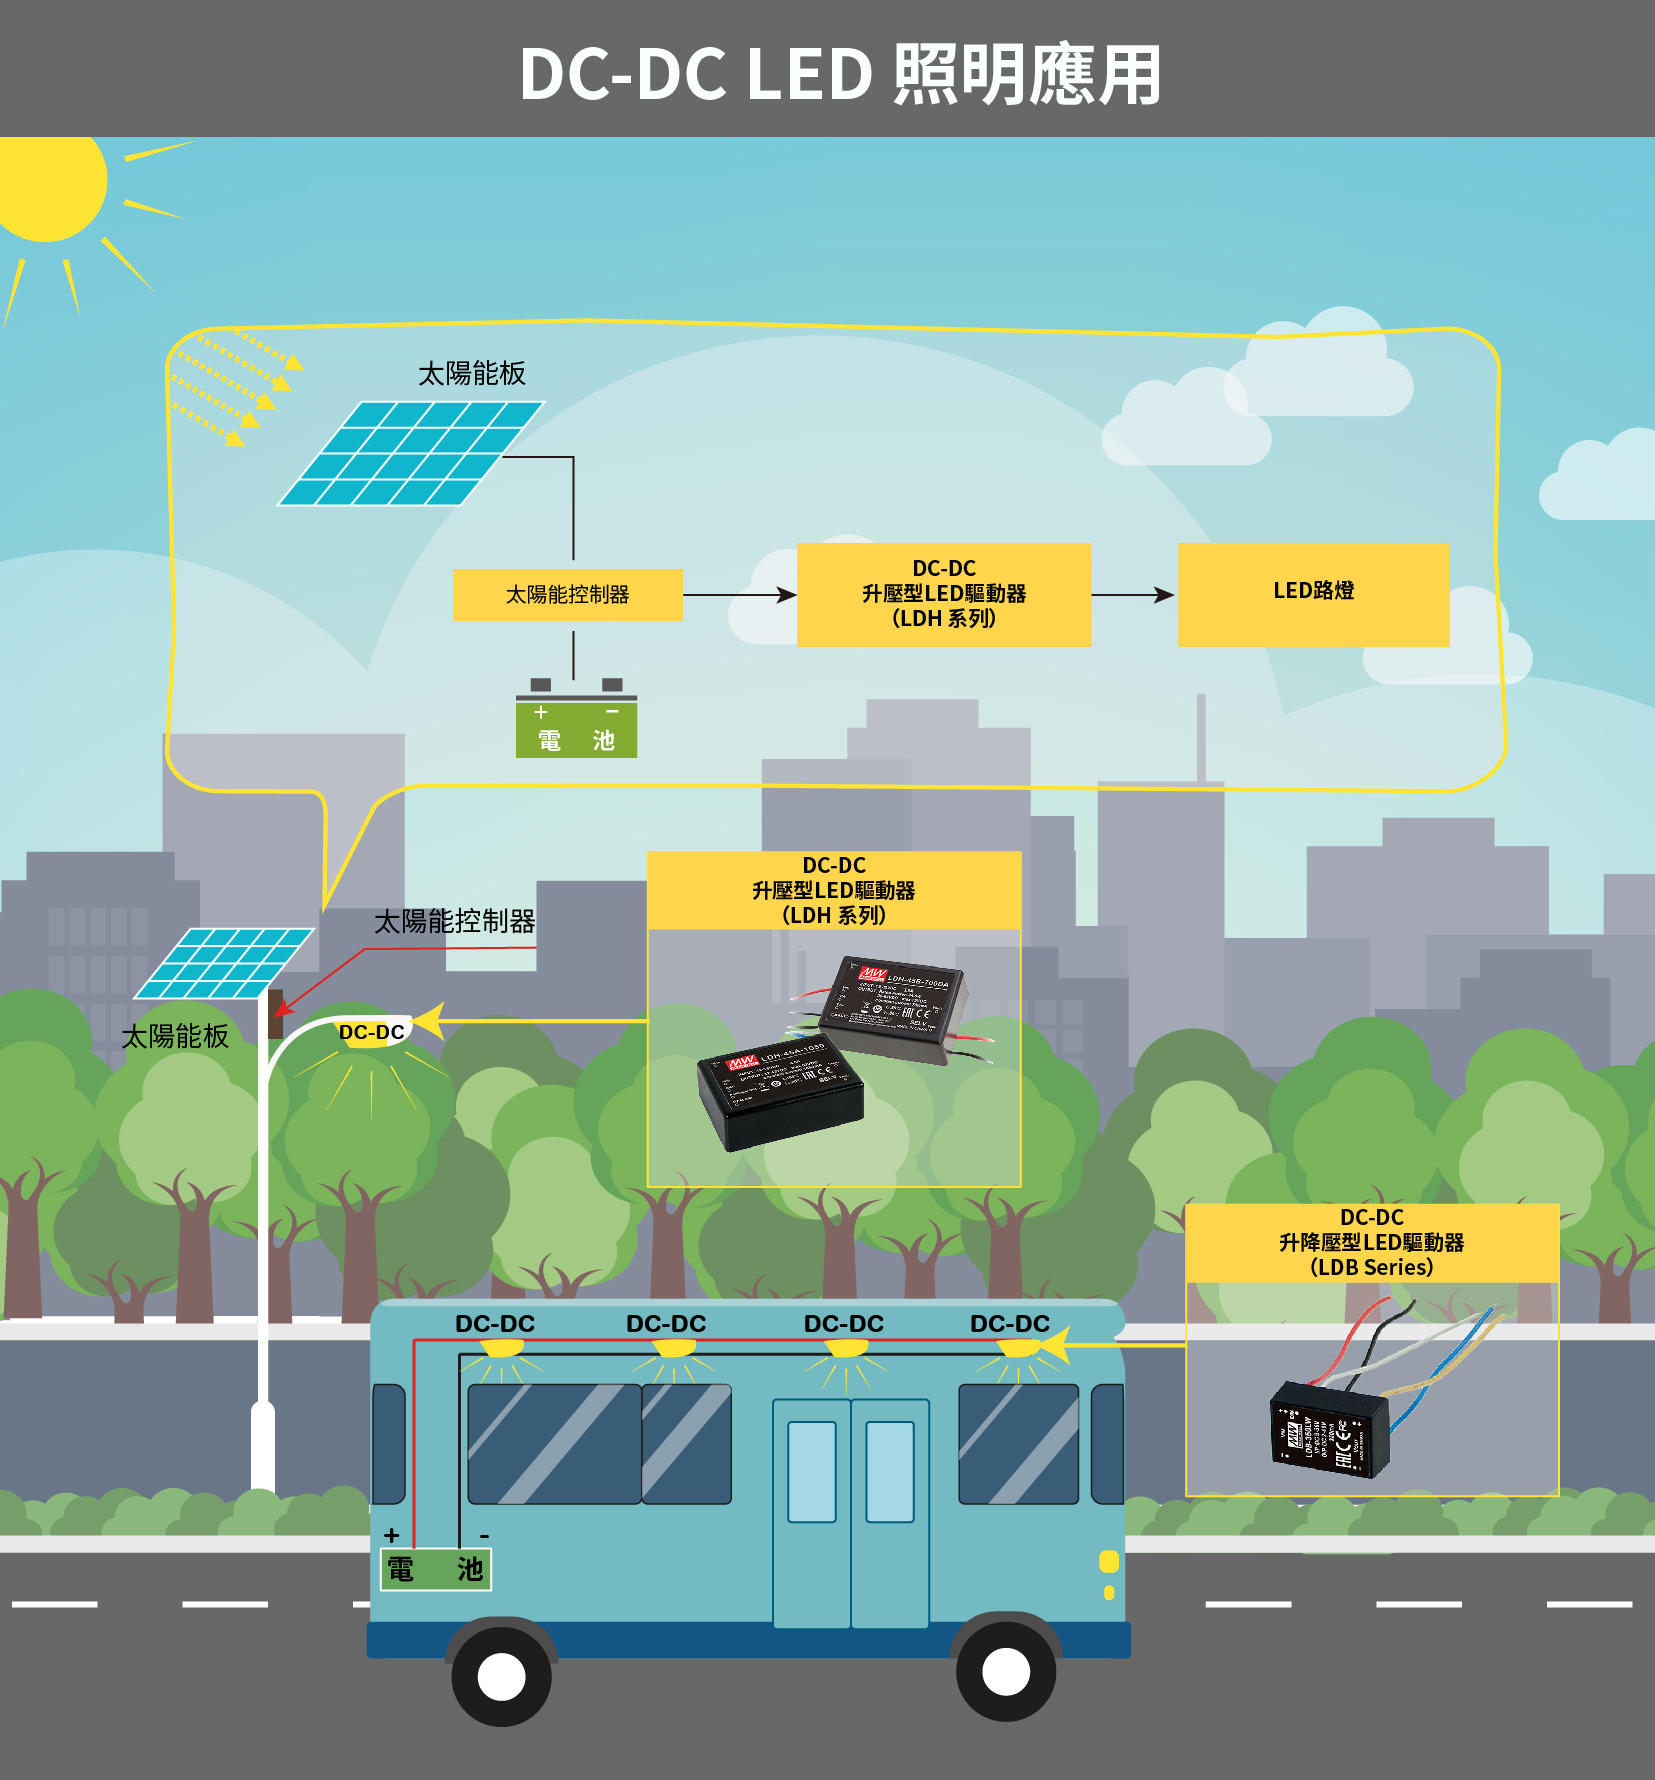 MEAN WELL LDH and LDB series, DC/DC boost type and Buck-boost LED driver, DC/DC LED lighting application